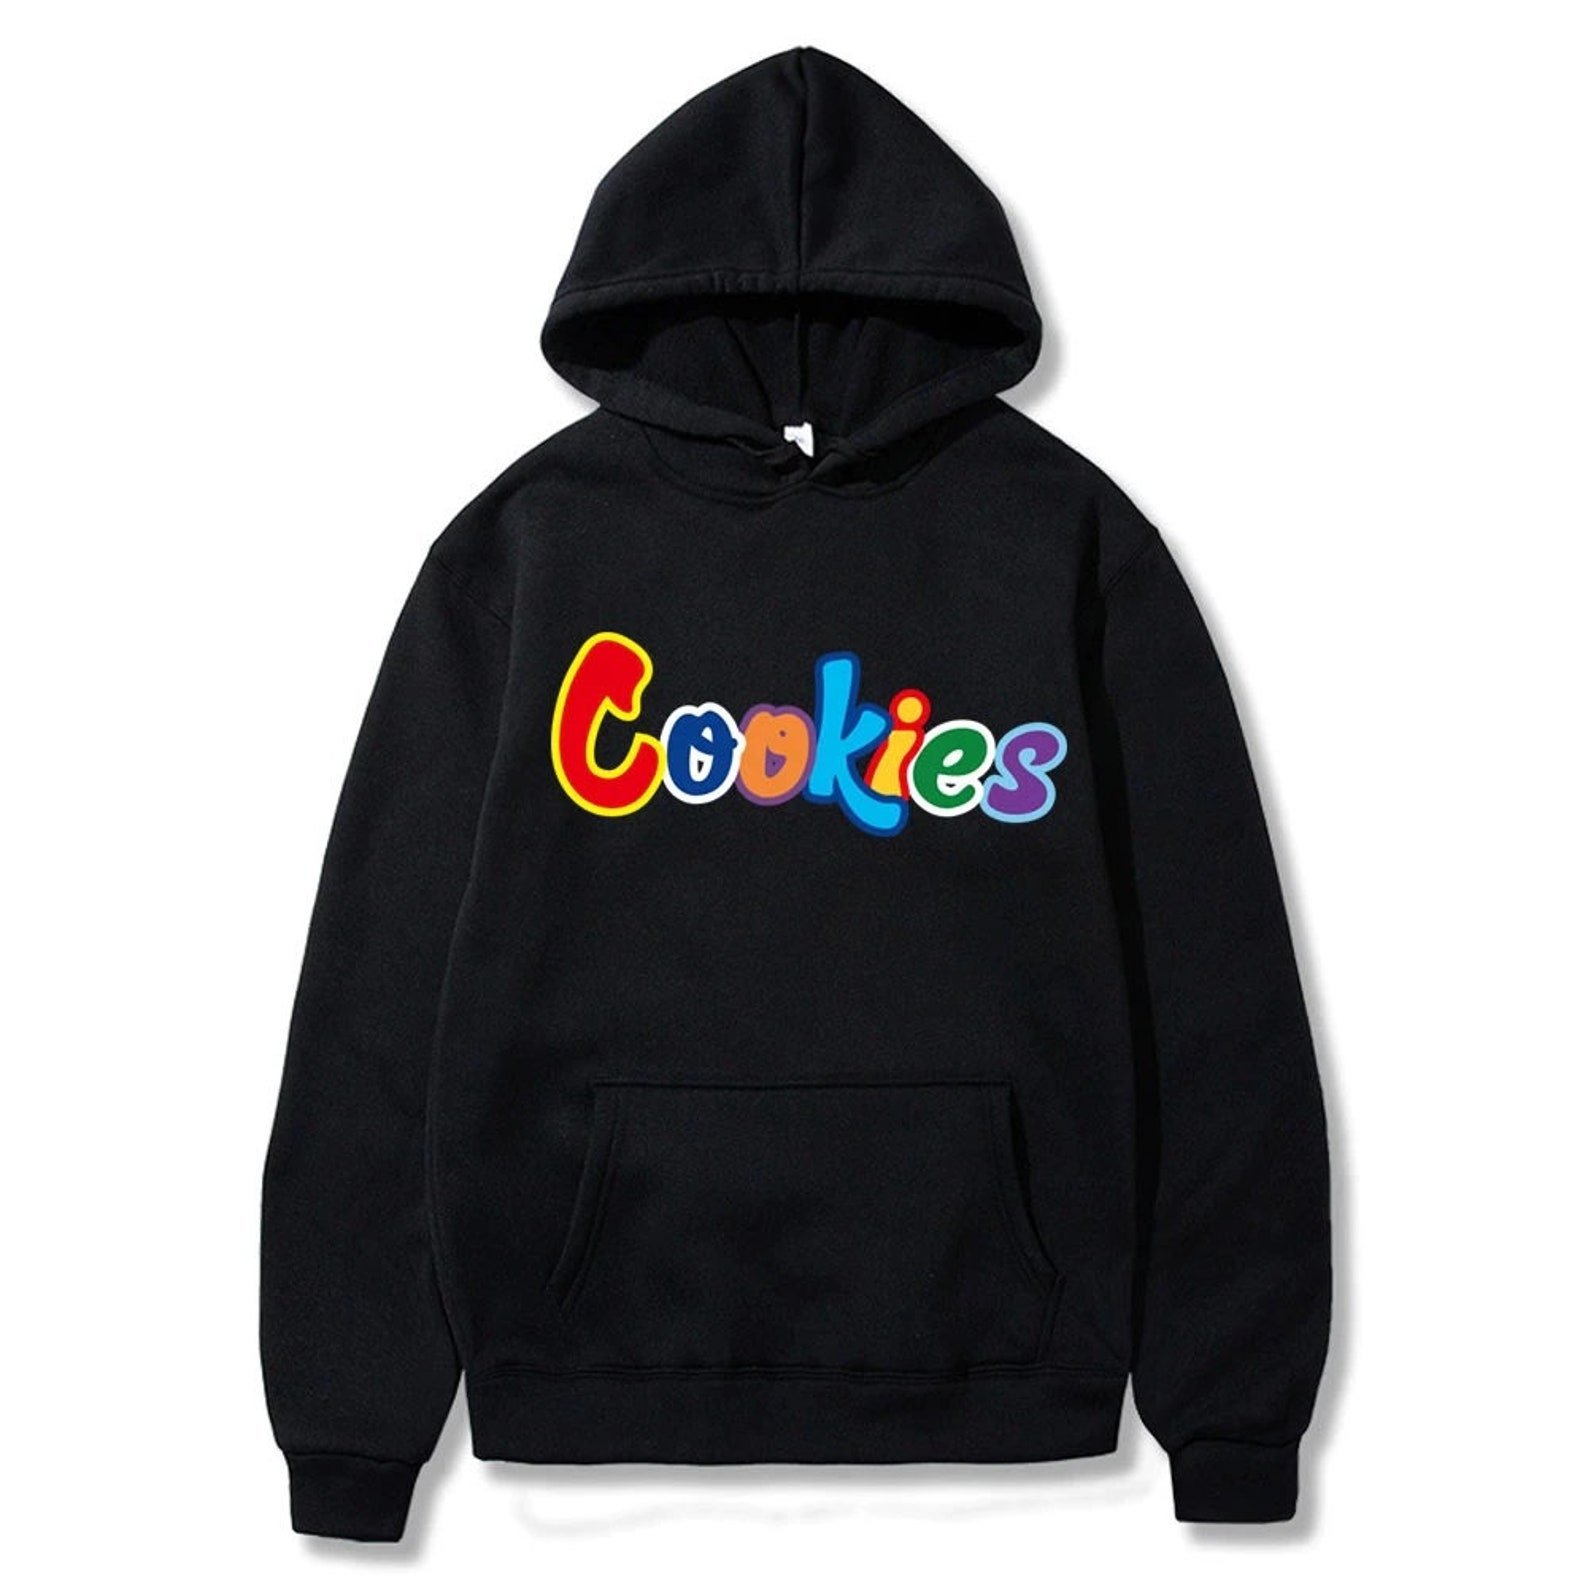 The Cookies brand hoodie is more than just a piece of clothing;